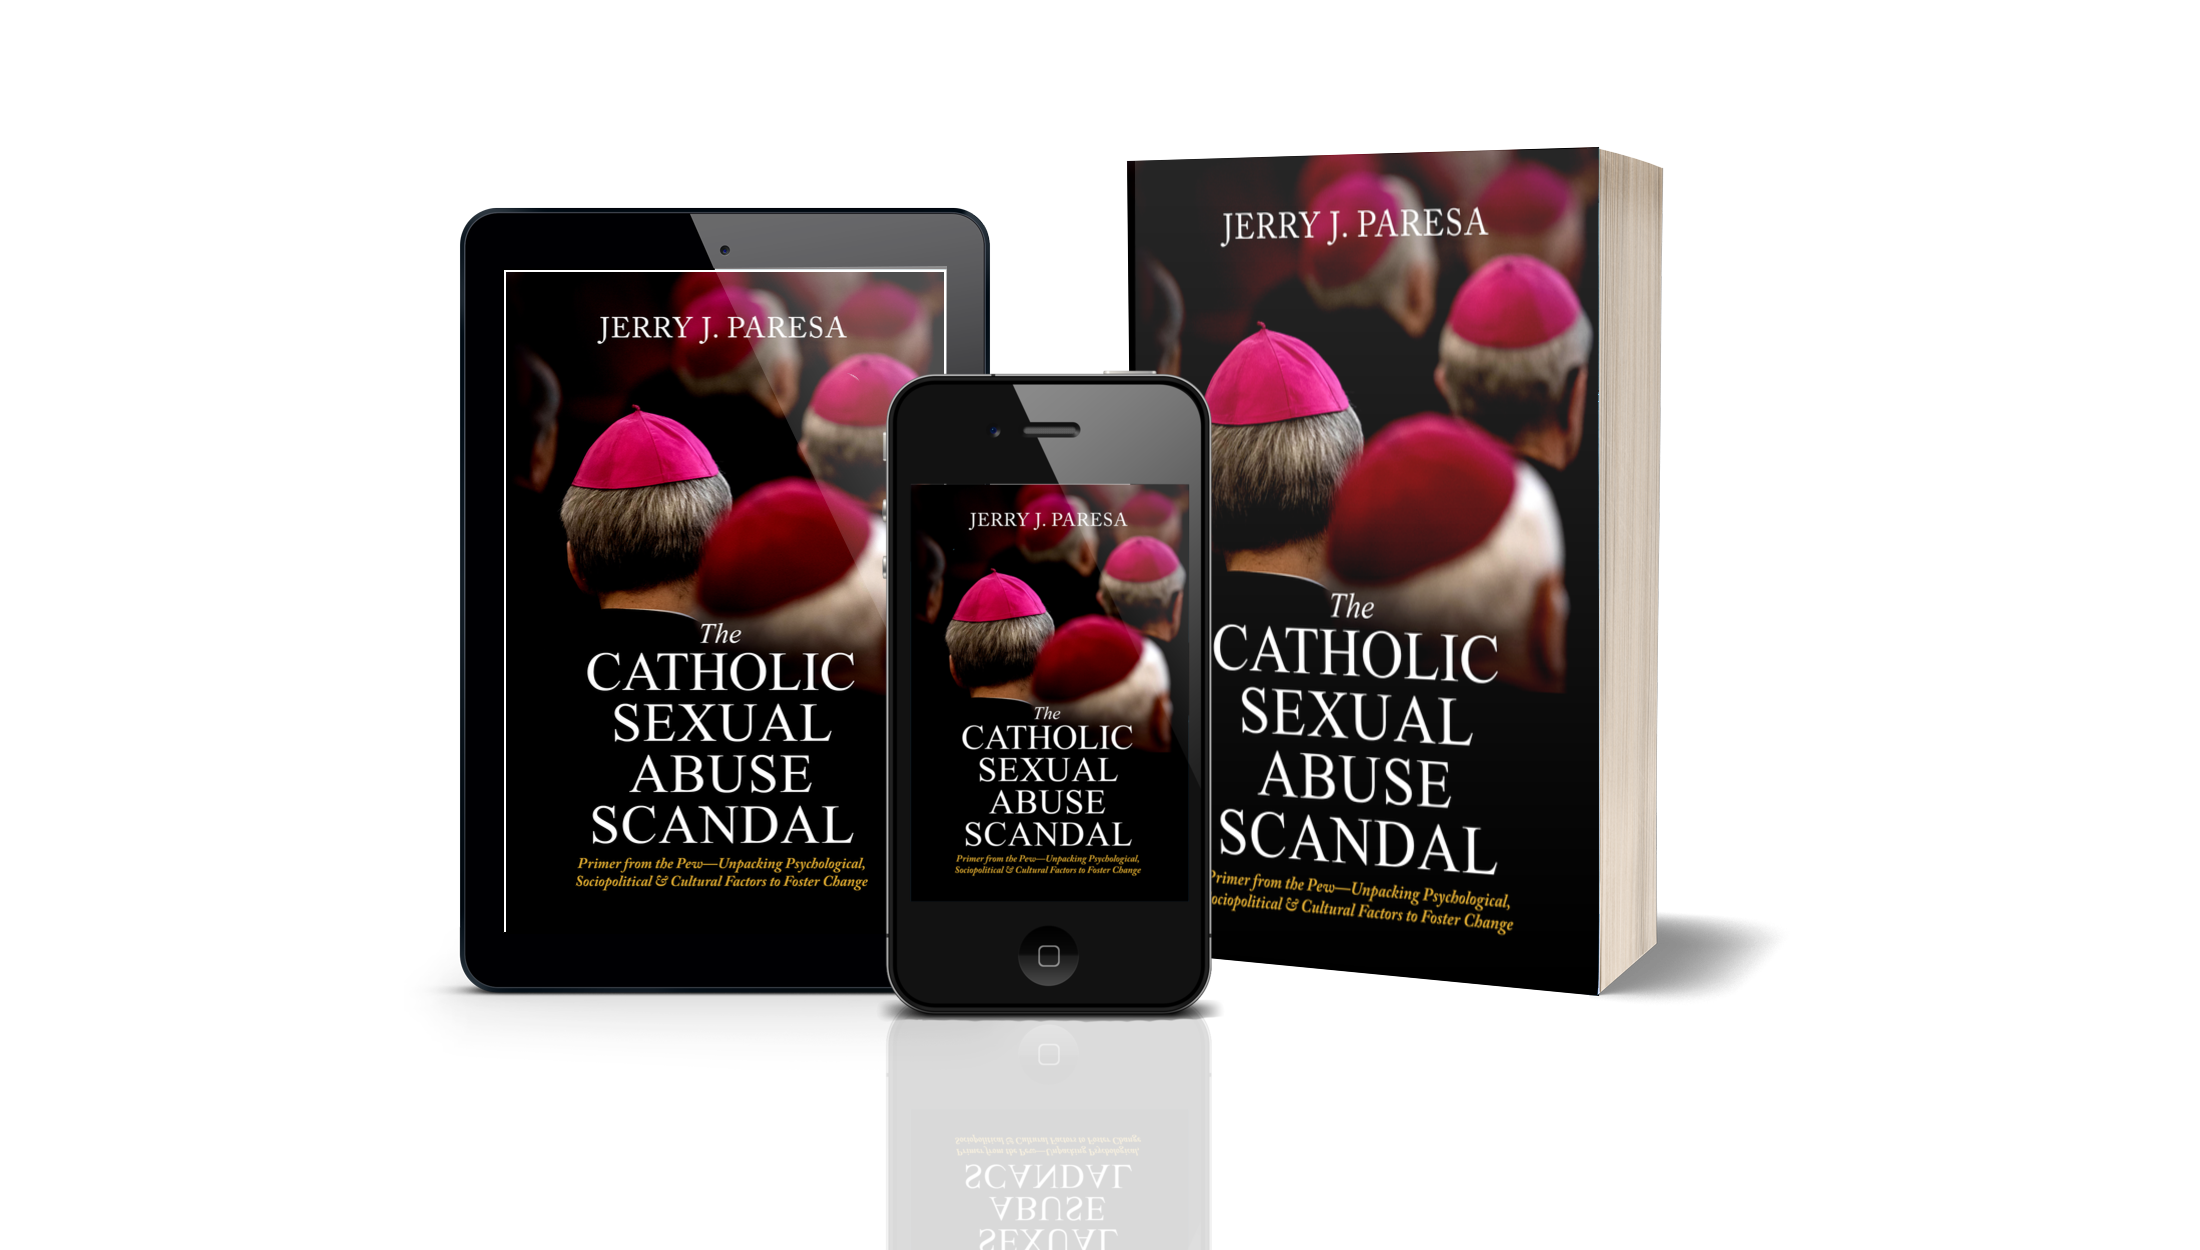 An Insider’s Uniquely Objective Examination of the Catholic Clergy Sexual Abuse Scandal